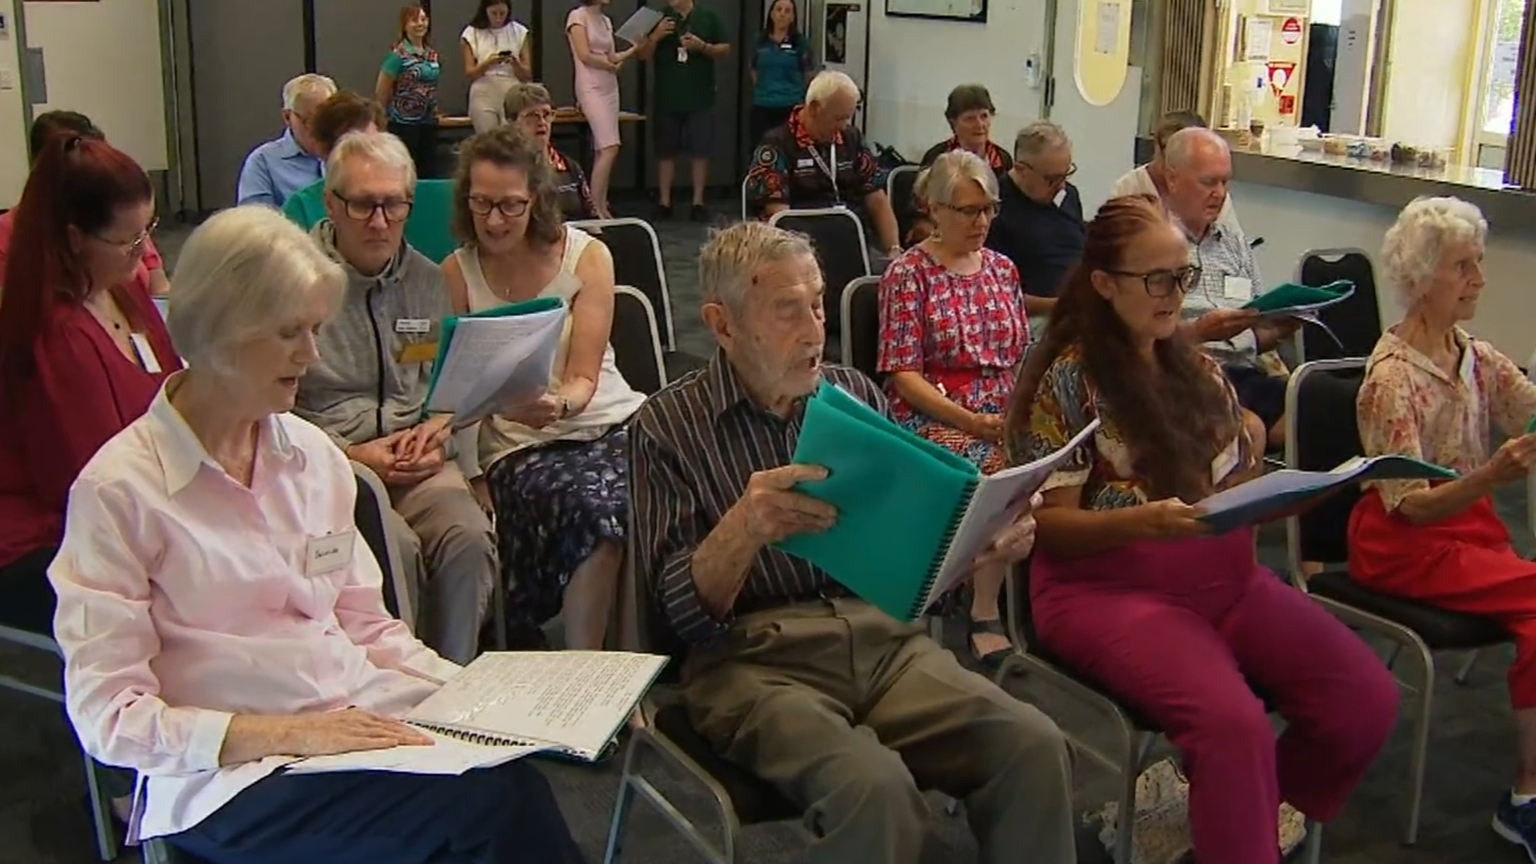 Brisbane choir achieves 'amazing things' with dementia patients